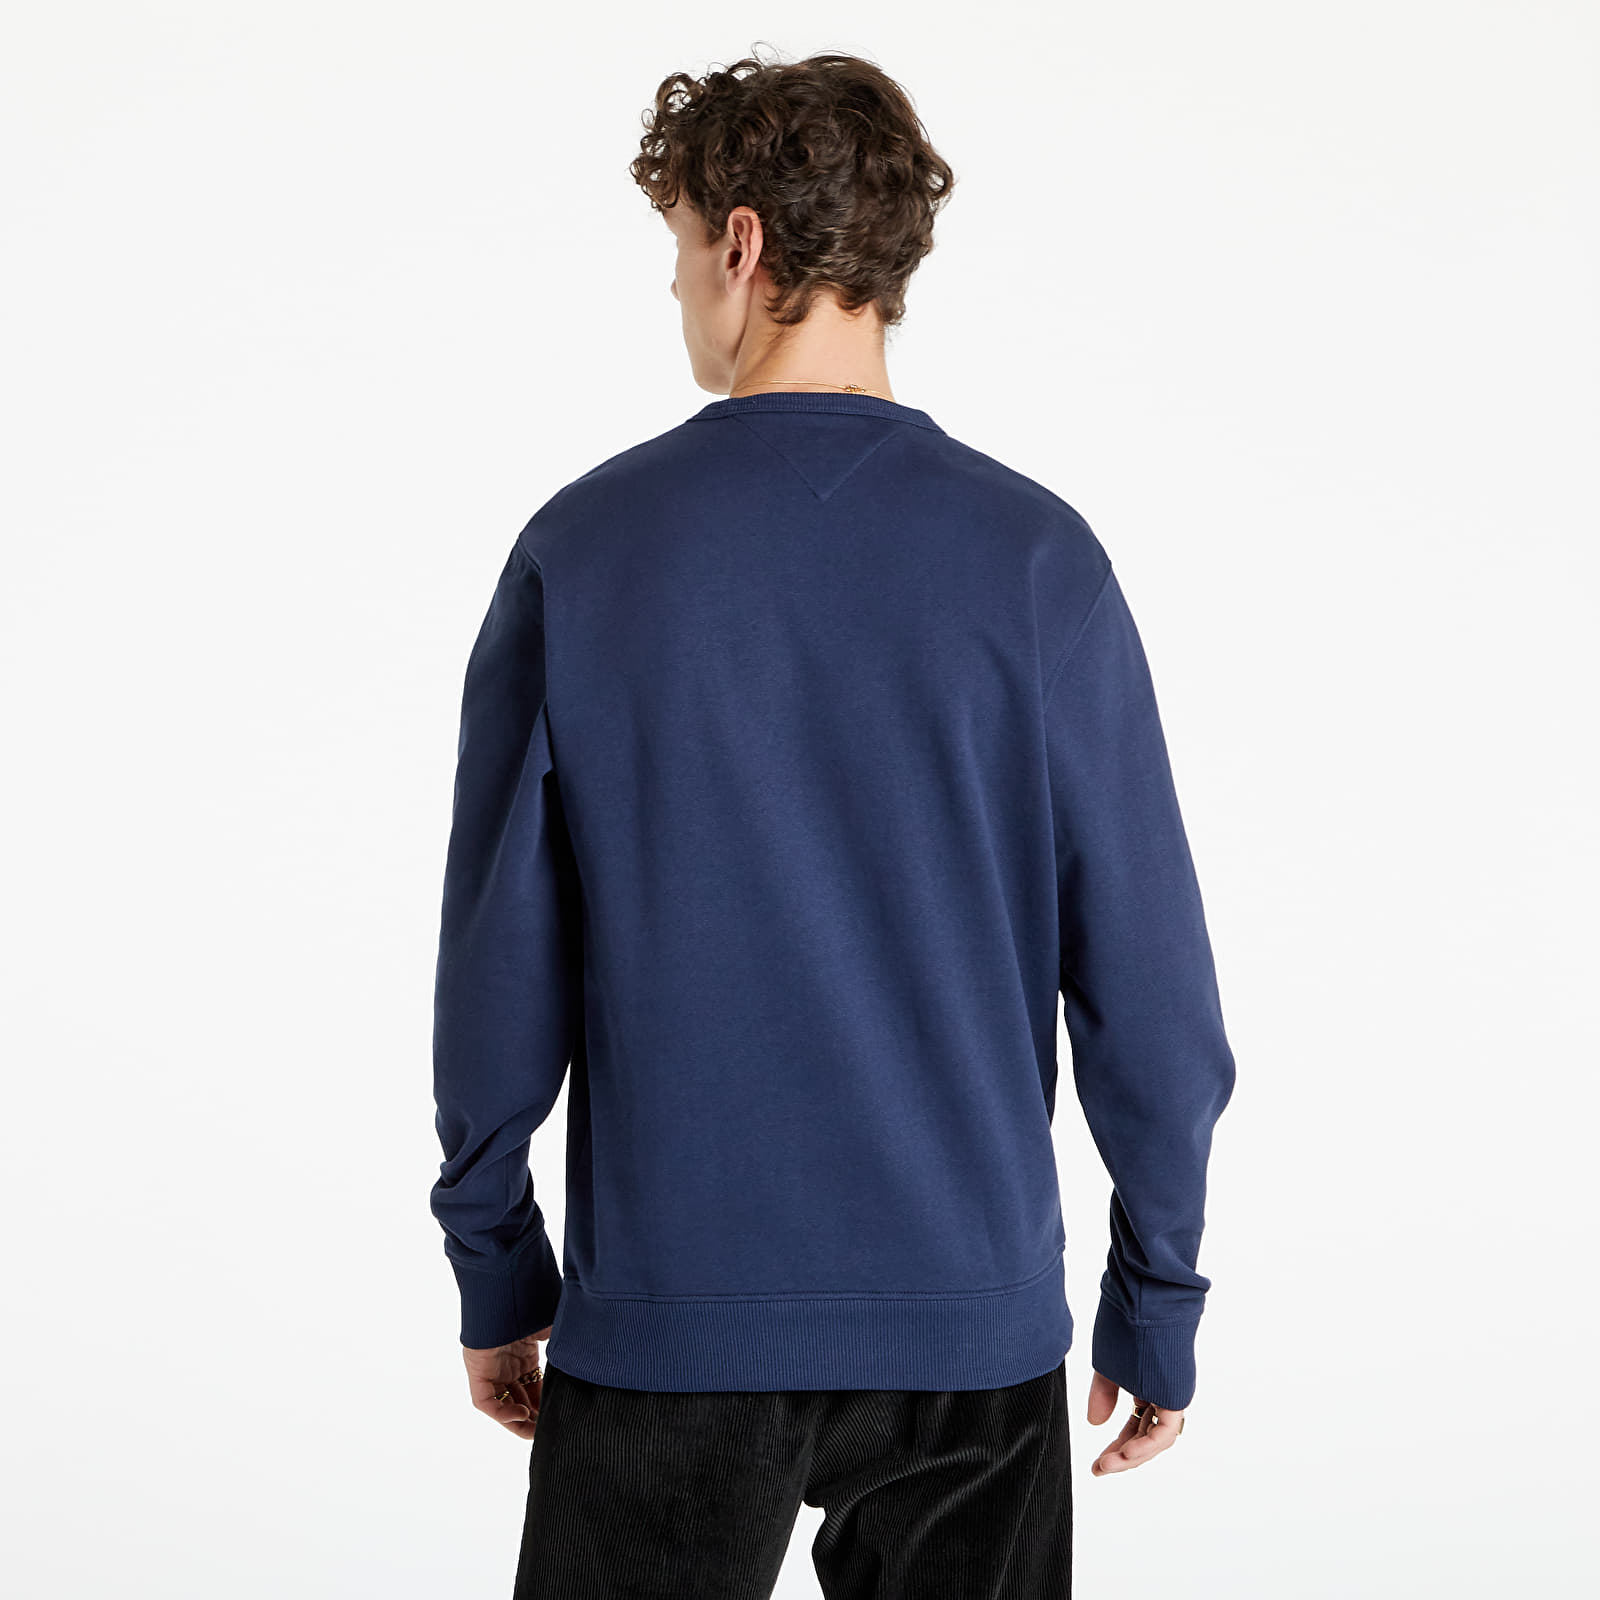 Navy Hoodies Twilight | Footshop Jeans Entry Graphic Tommy and sweatshirts Crew